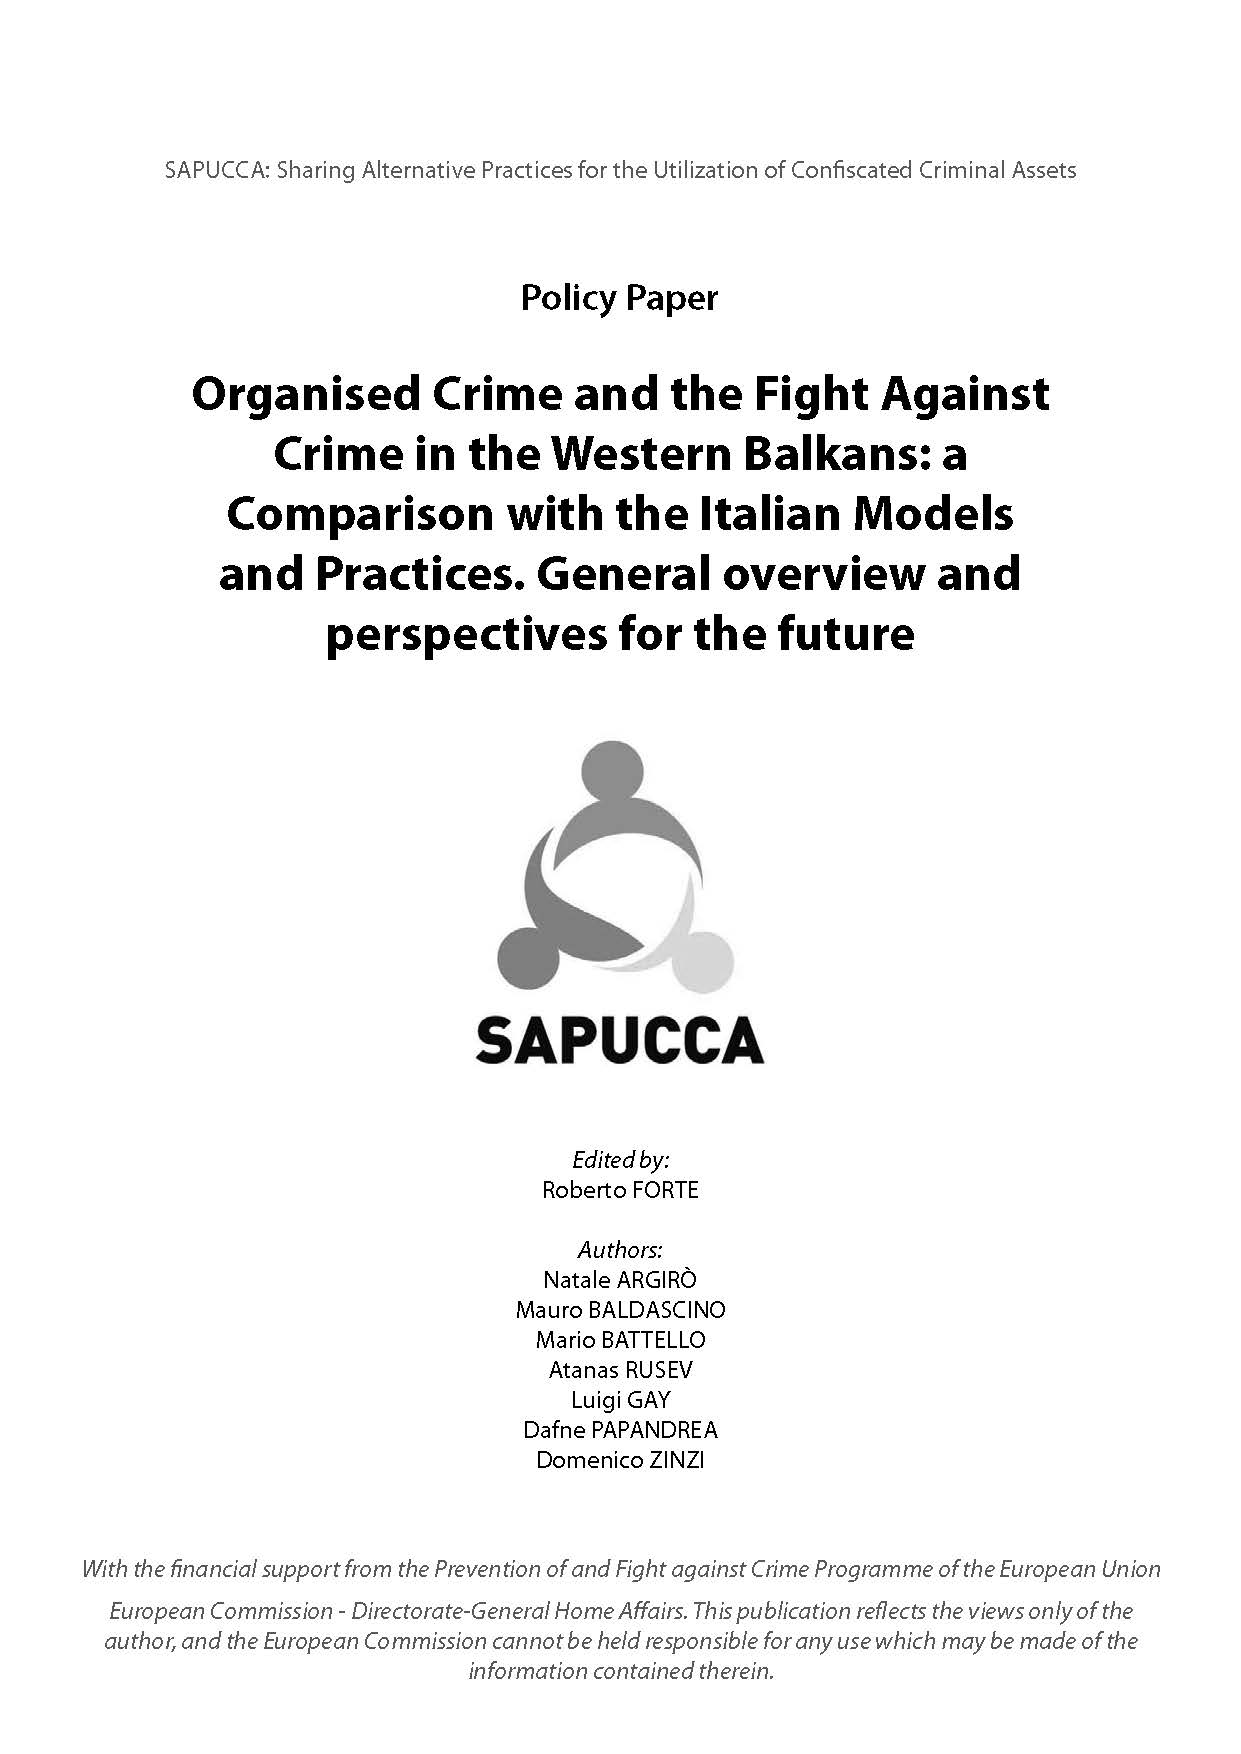 Organised Crime and the Fight Against Crime in the Western Balkans: a Comparison with the Italian Modelsand Practices. General overview and perspectives for the future